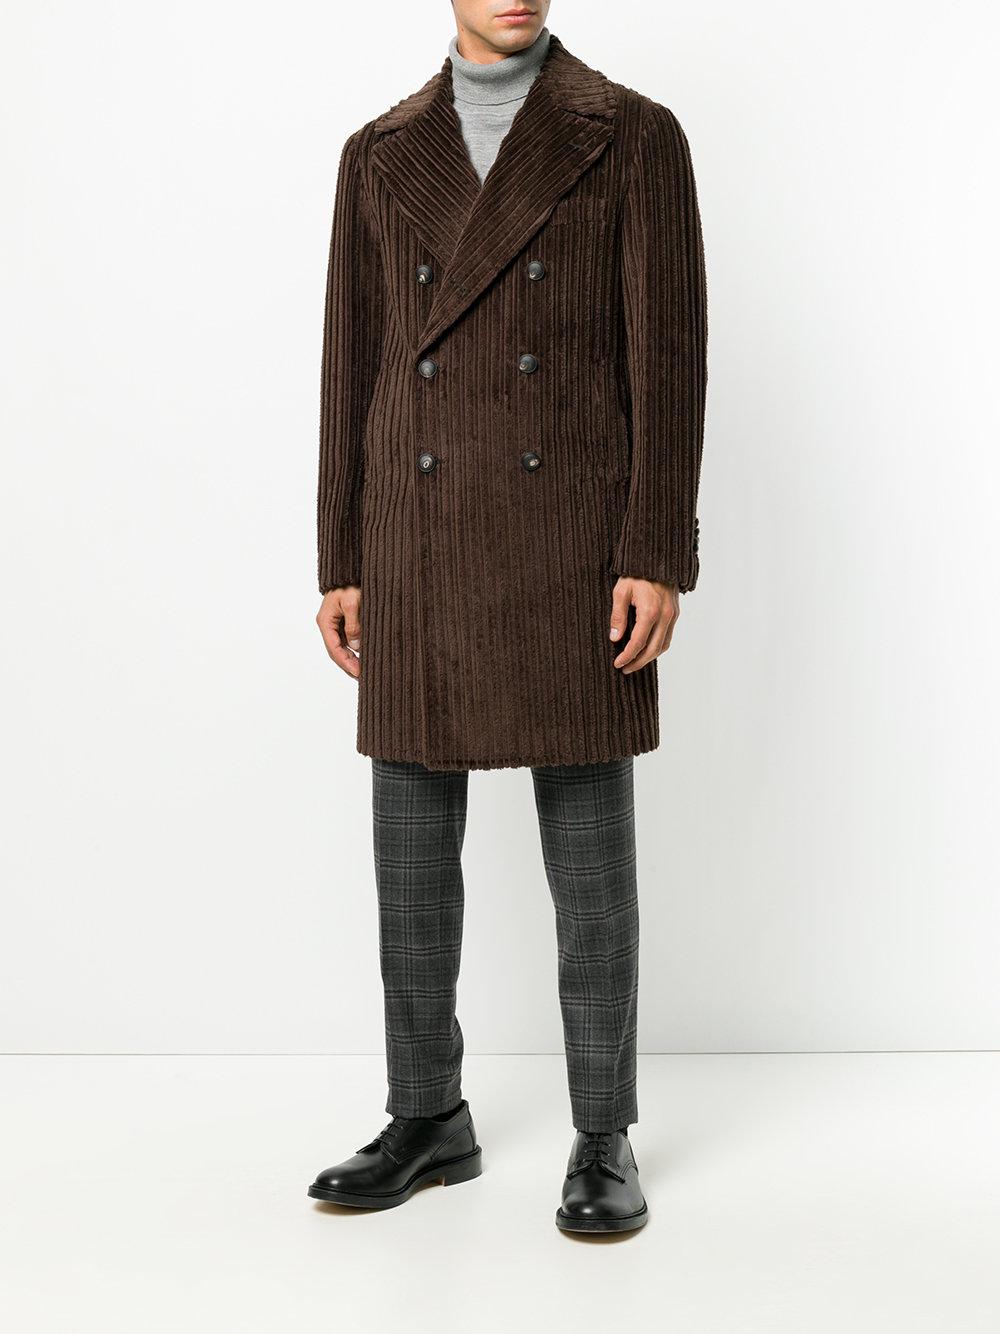 Lyst - Tagliatore Double Breasted Corduroy Coat in Brown for Men